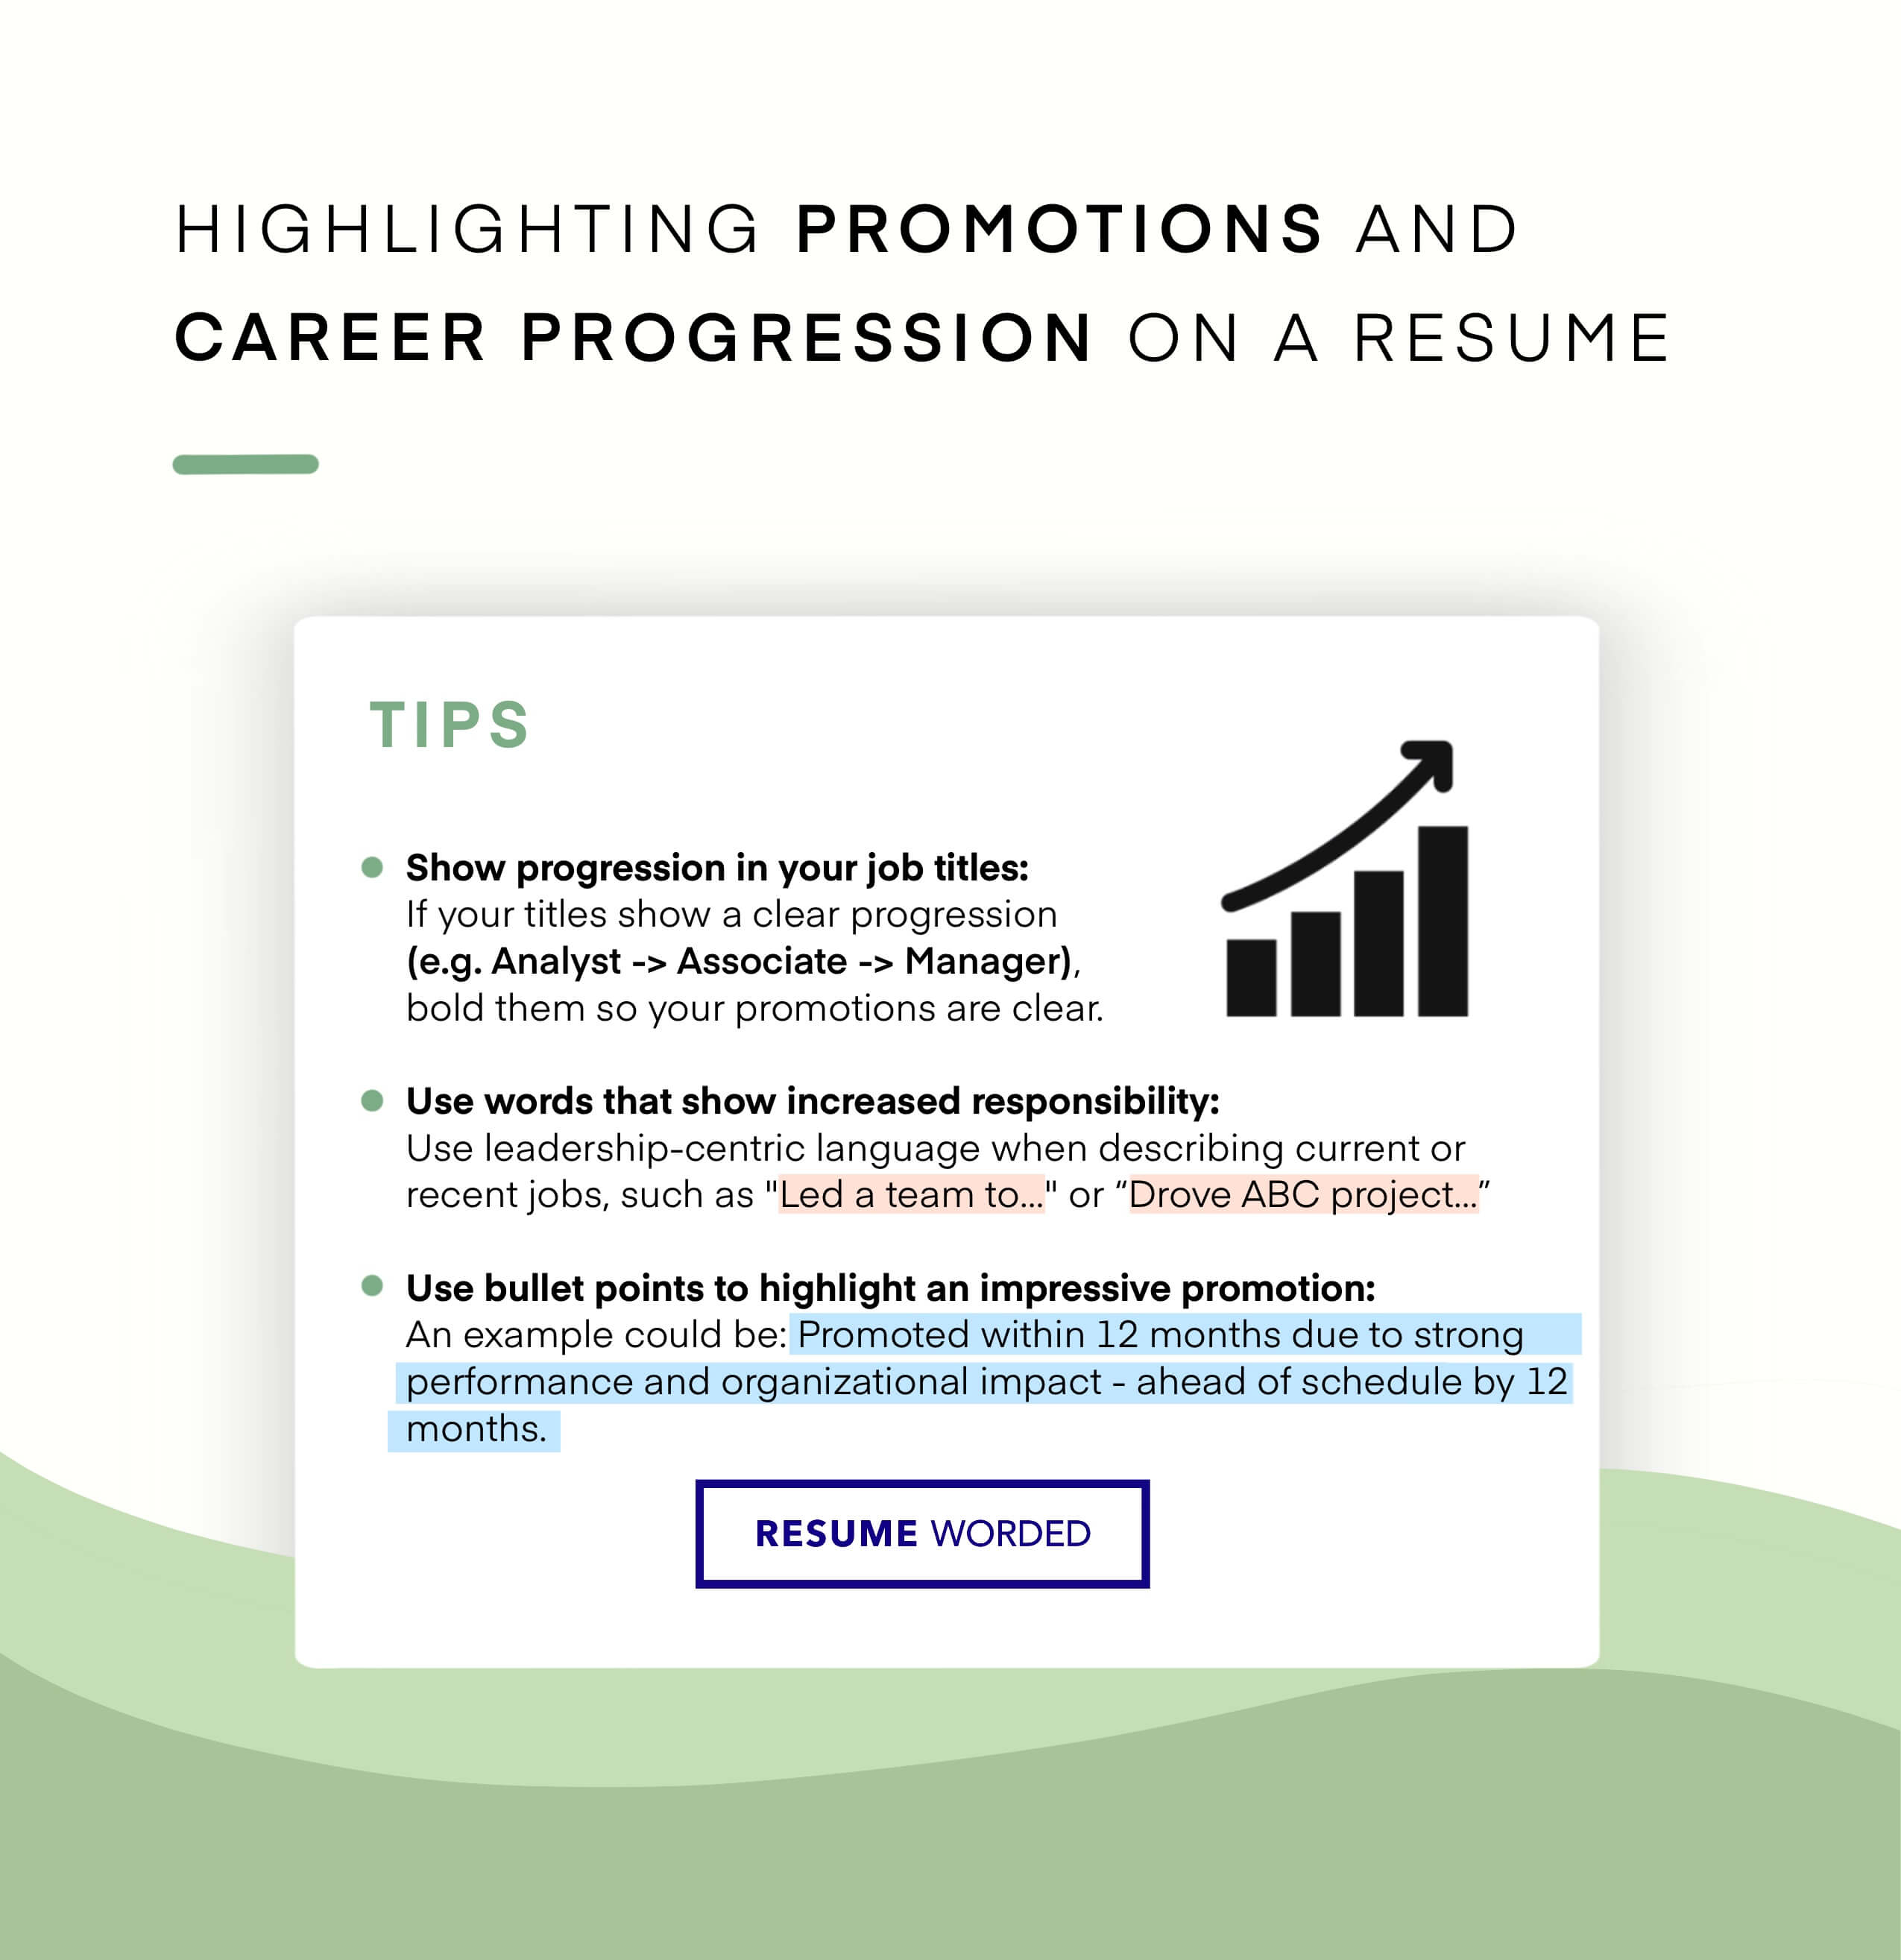 Promotions show proactivity and growth in accounting - Accounting Manager Resume